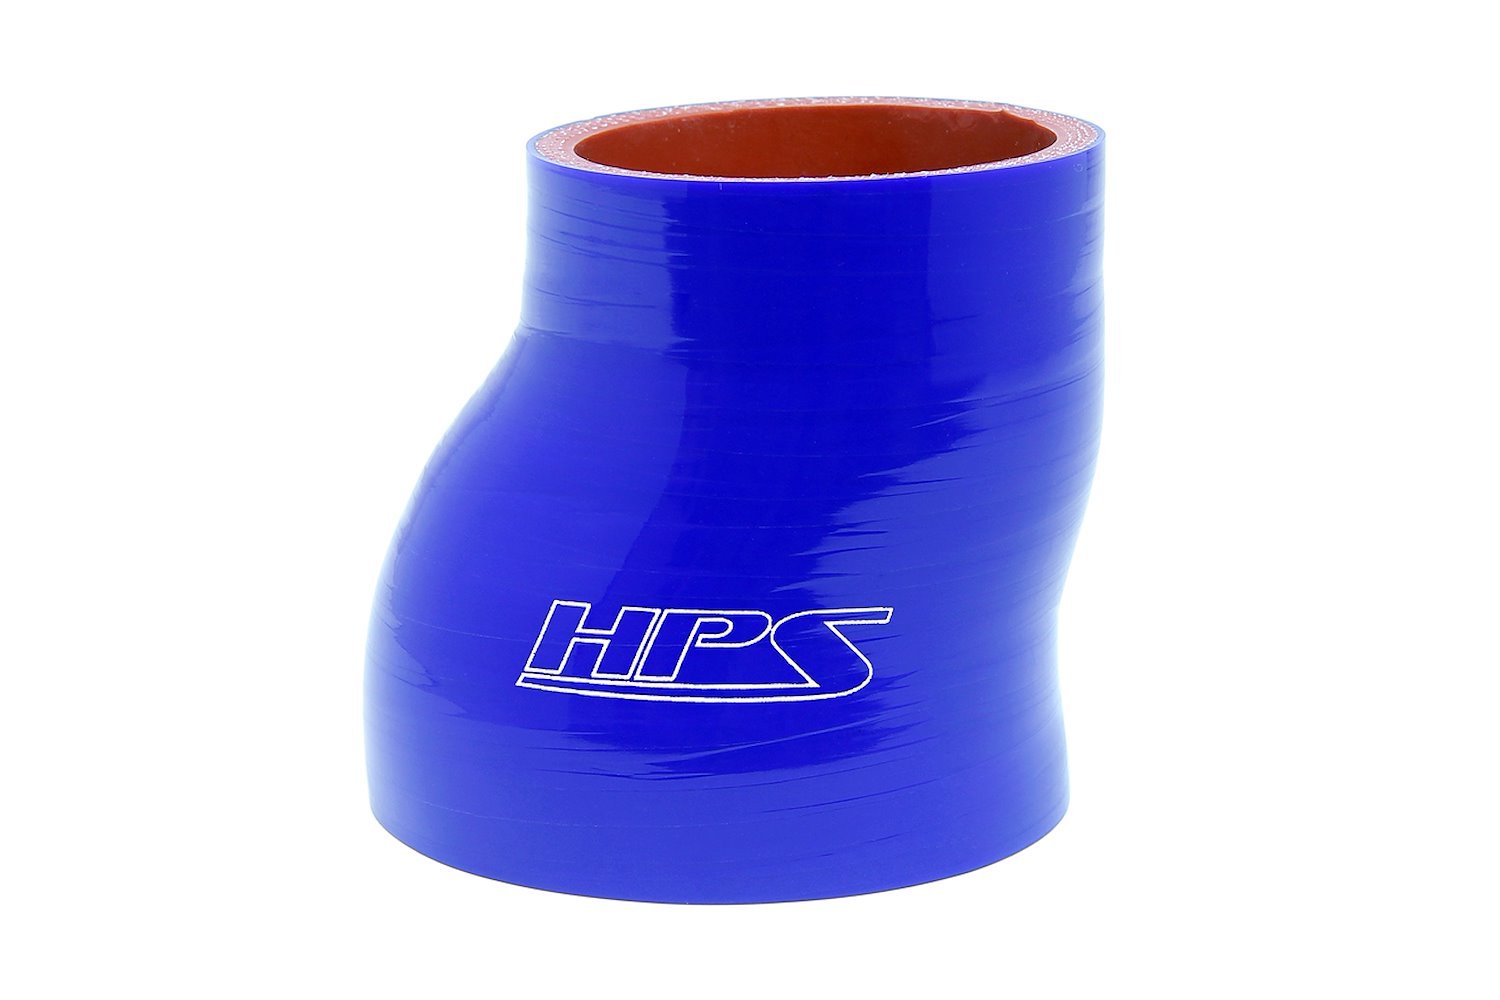 HTSOR-300-350-L6-BLUE Silicone Offset Reducer Hose, High-Temp Reinforced, 3 in. - 3-1/2 in. ID, 6 in. Long, Blue